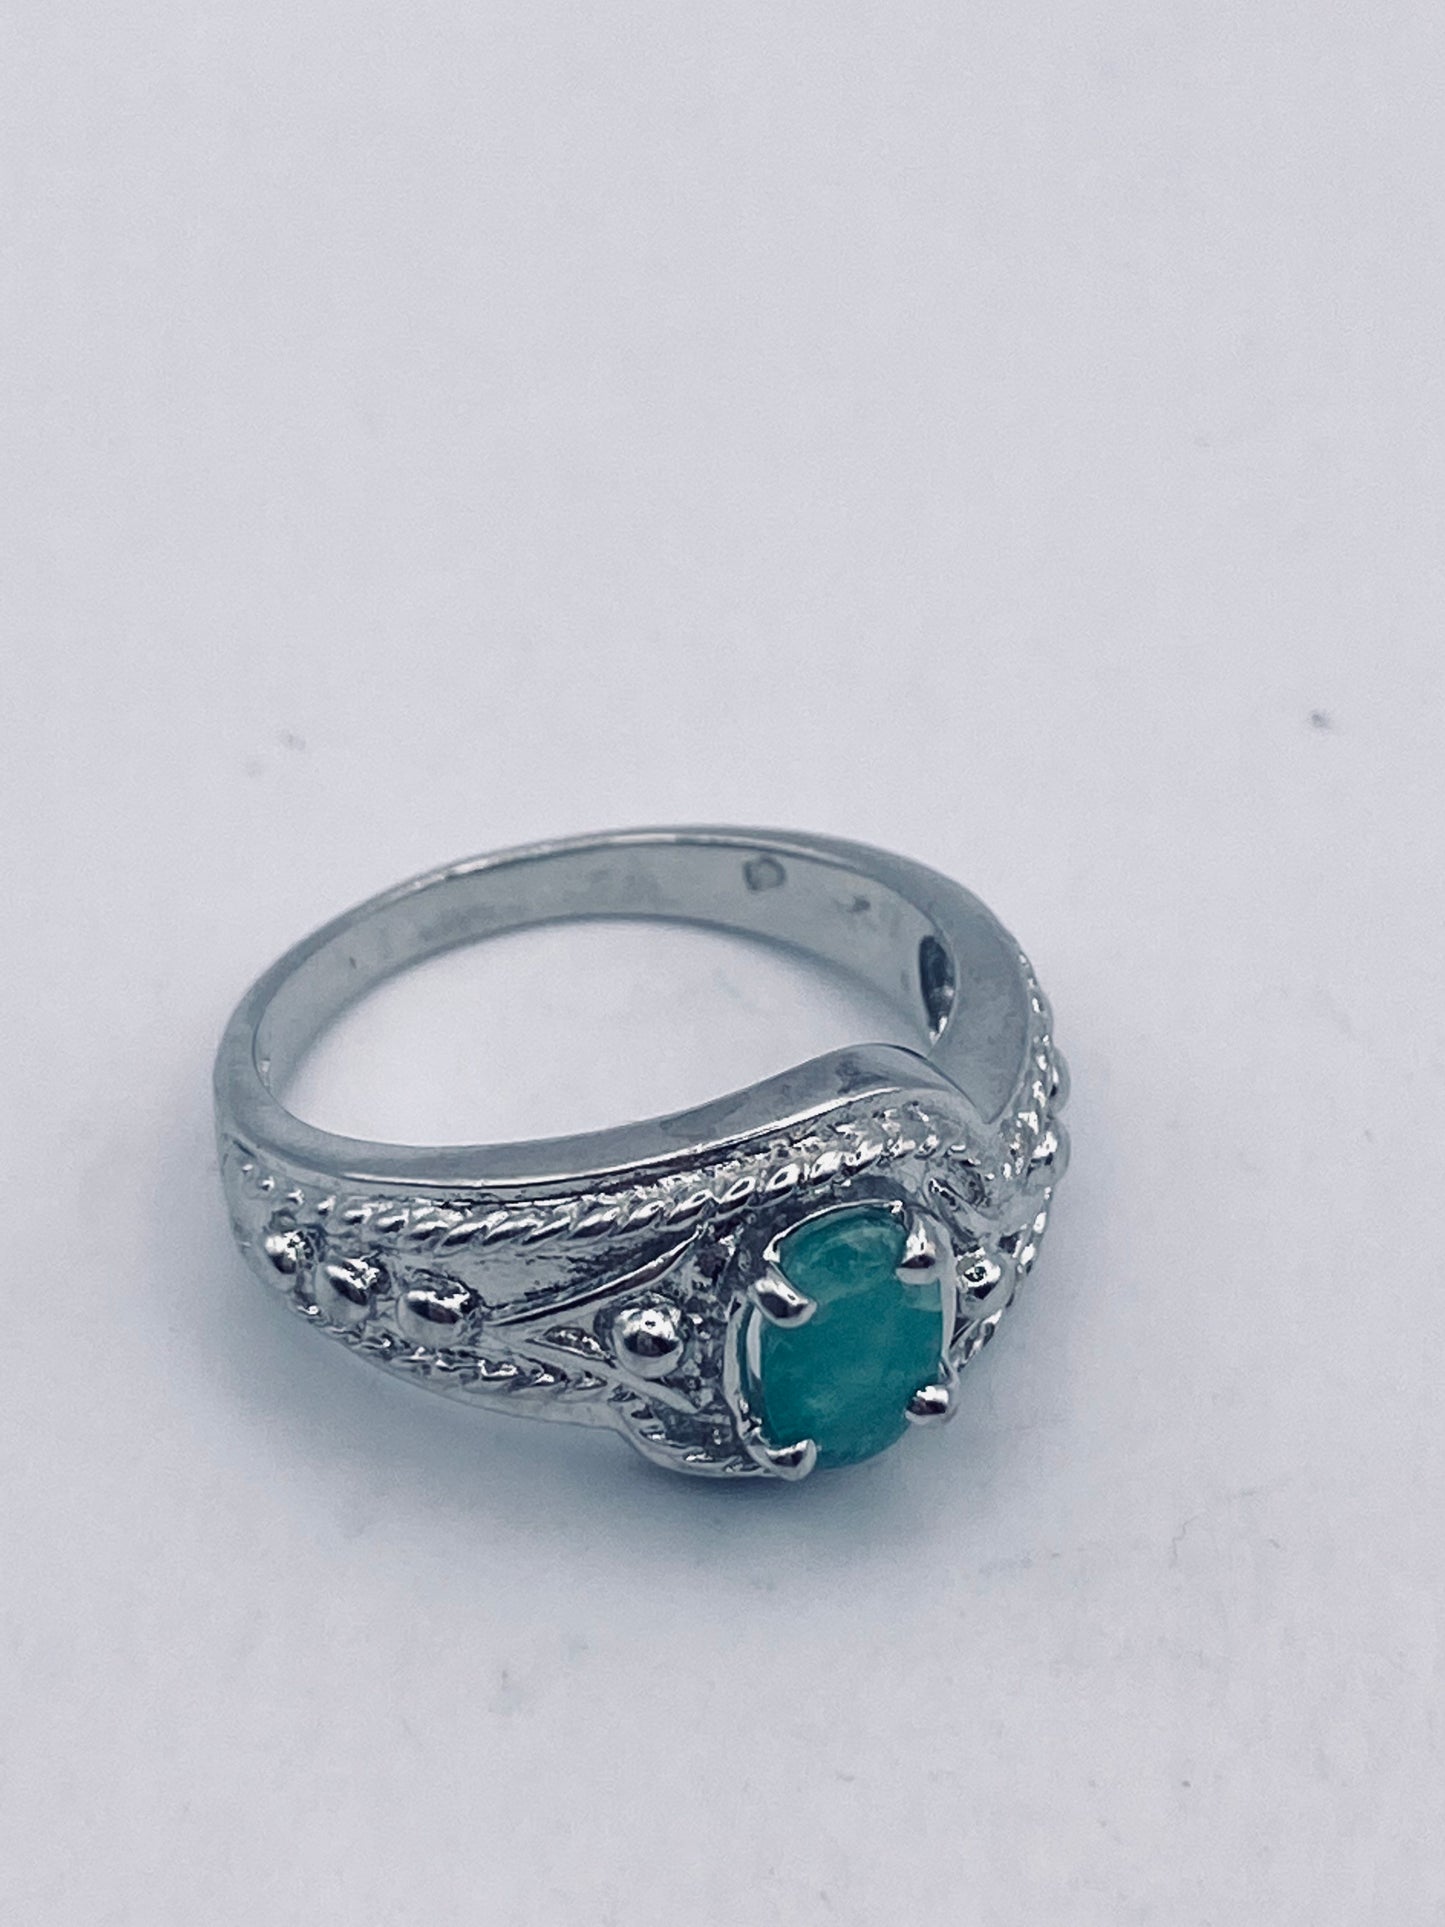 Vintage Green Emerald 925 Sterling Silver Ring Size 8